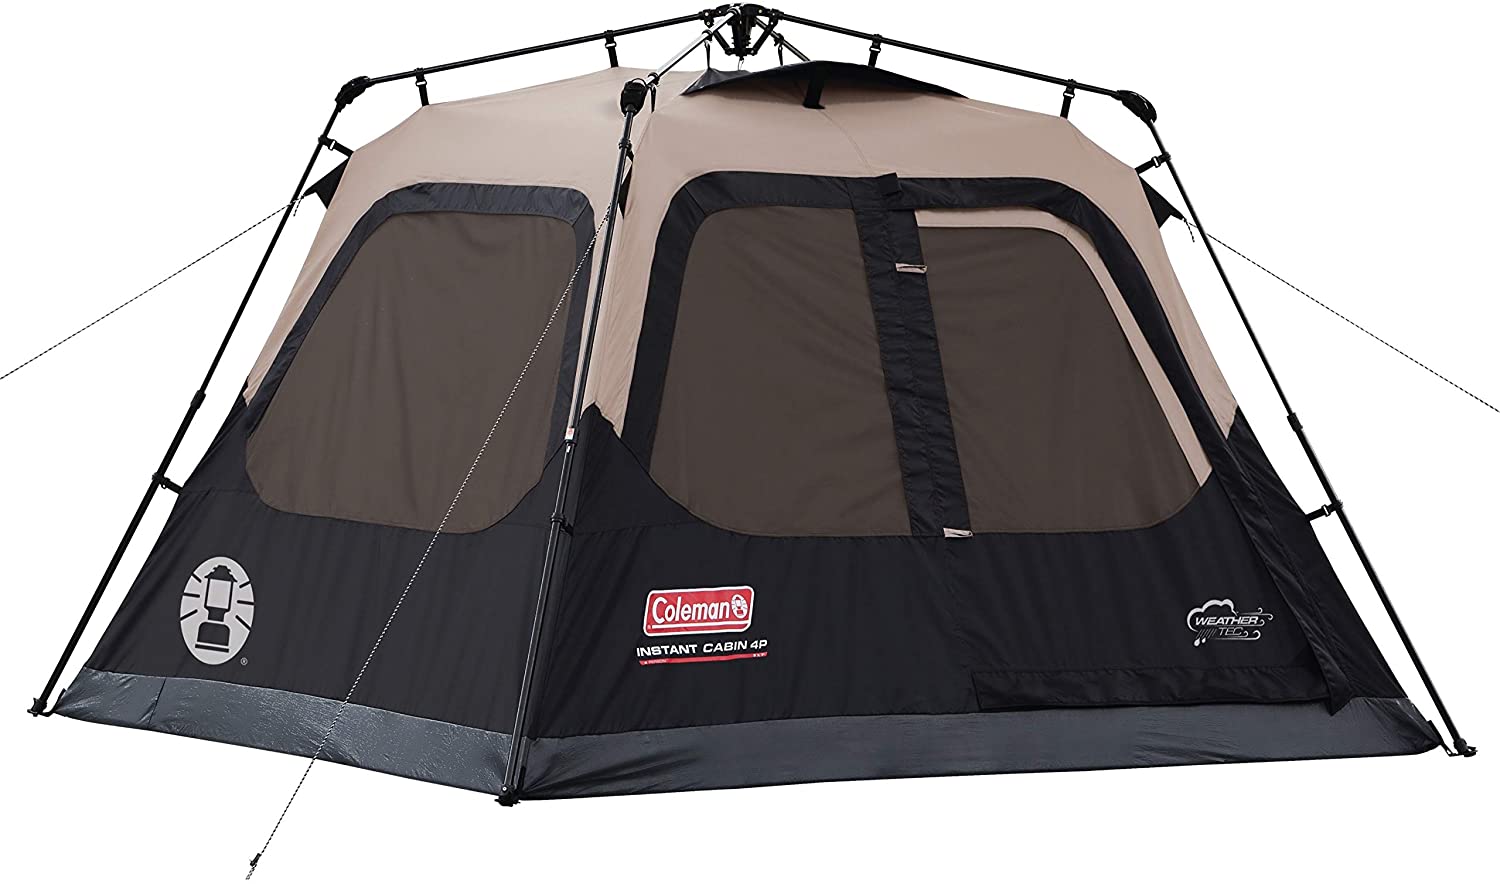 Photo 1 of Coleman Cabin Tent with Instant Setup | Cabin Tent for Camping Sets Up in 60 Seconds